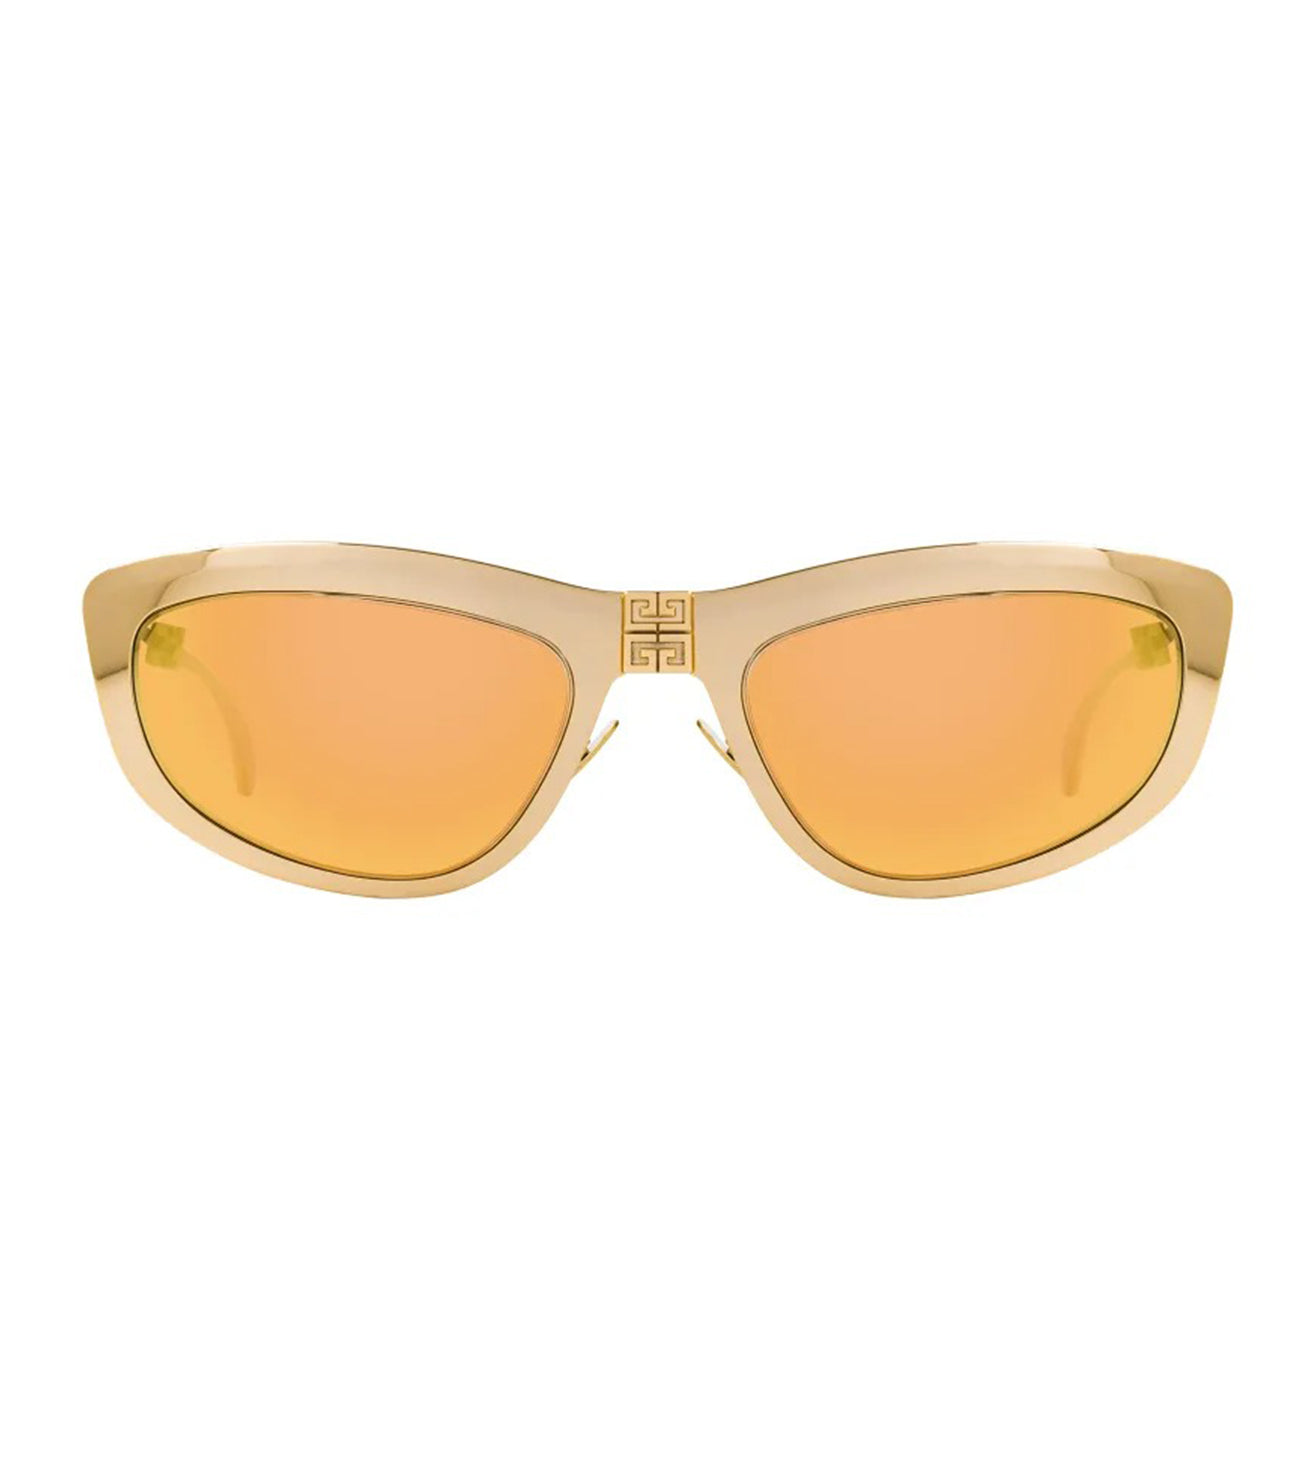 Givenchy Women's Brown Cat-eye Sunglasses